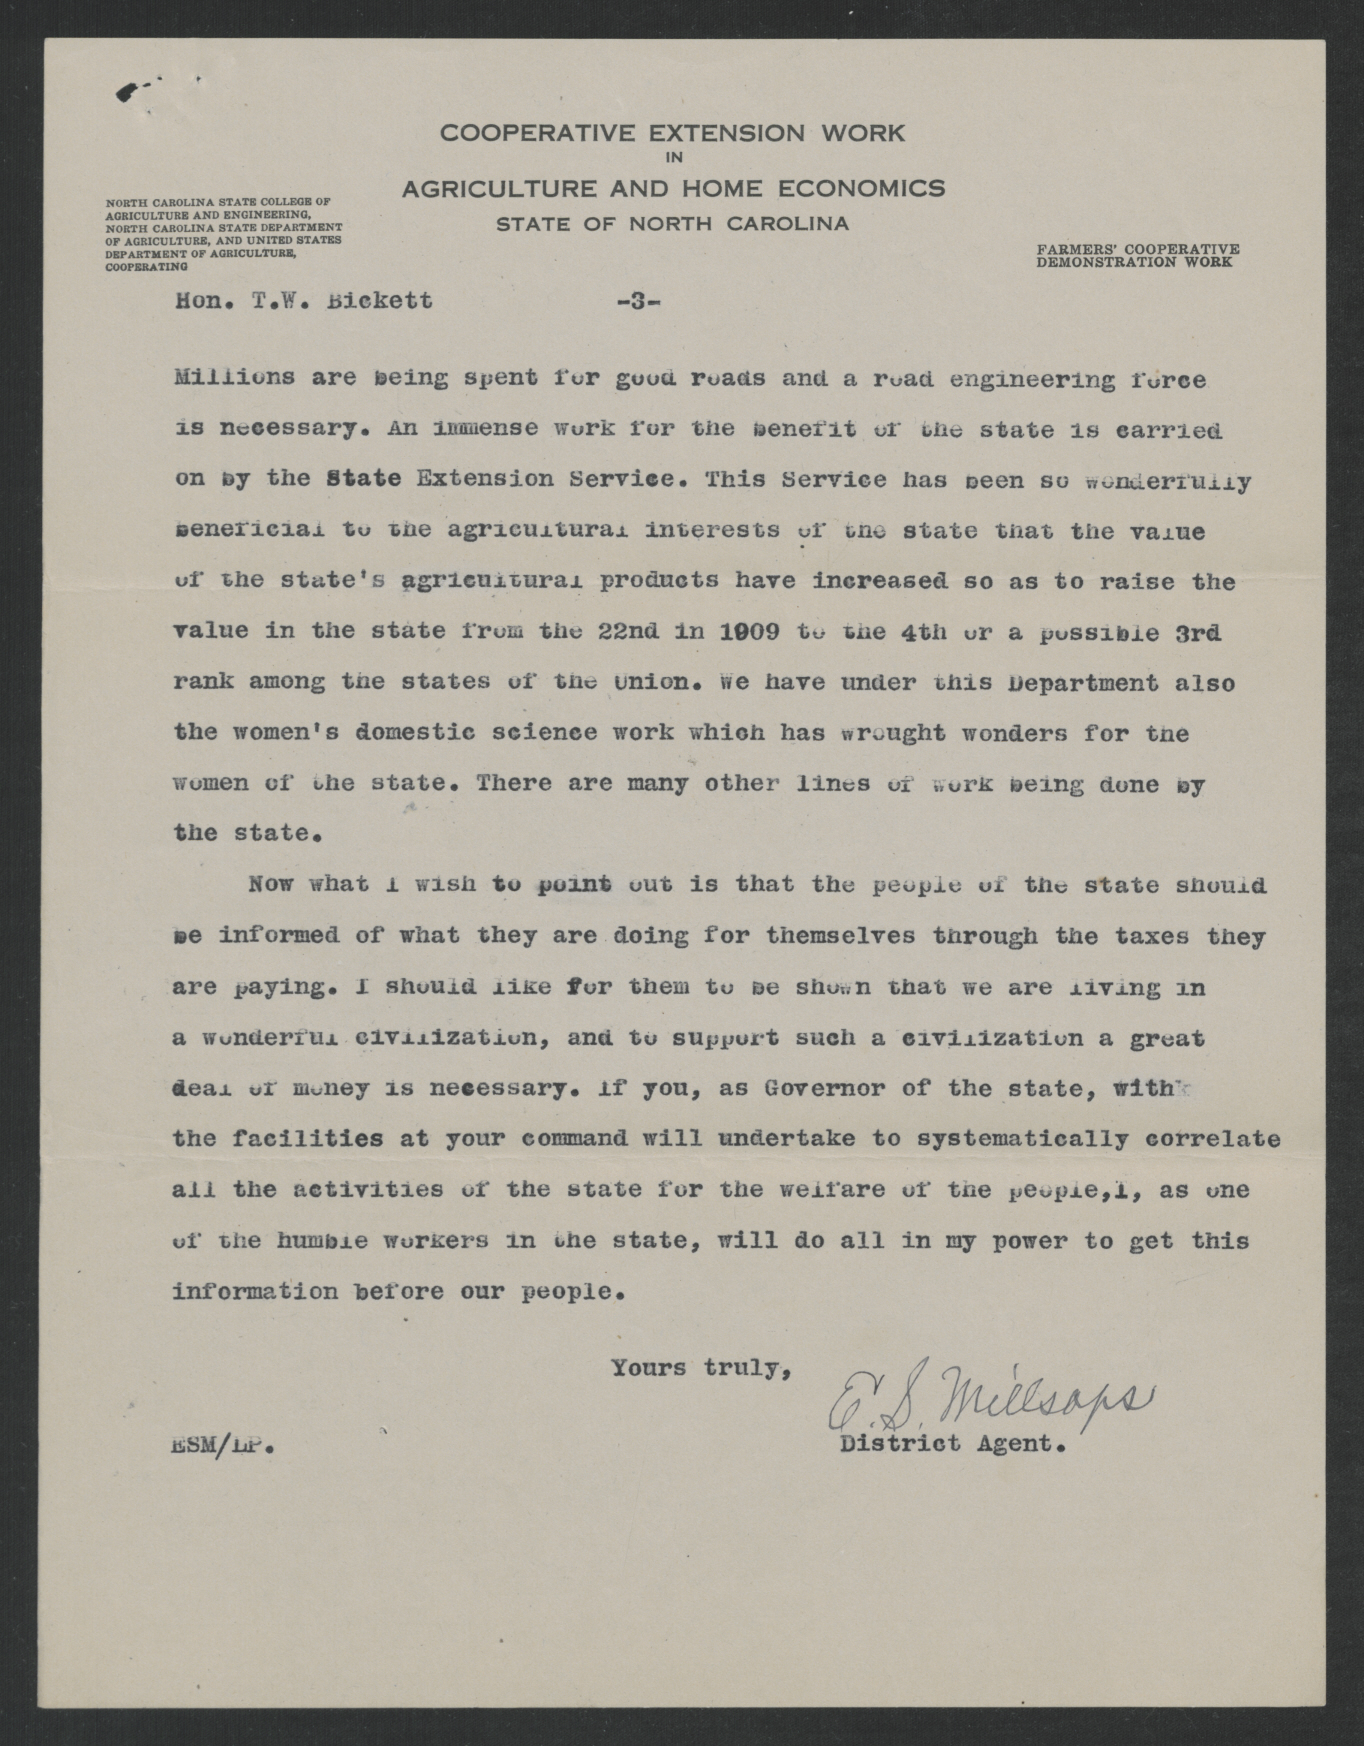 Letter from Elliott S. Millsaps to Thomas W. Bickett, January 2, 1920, page 3